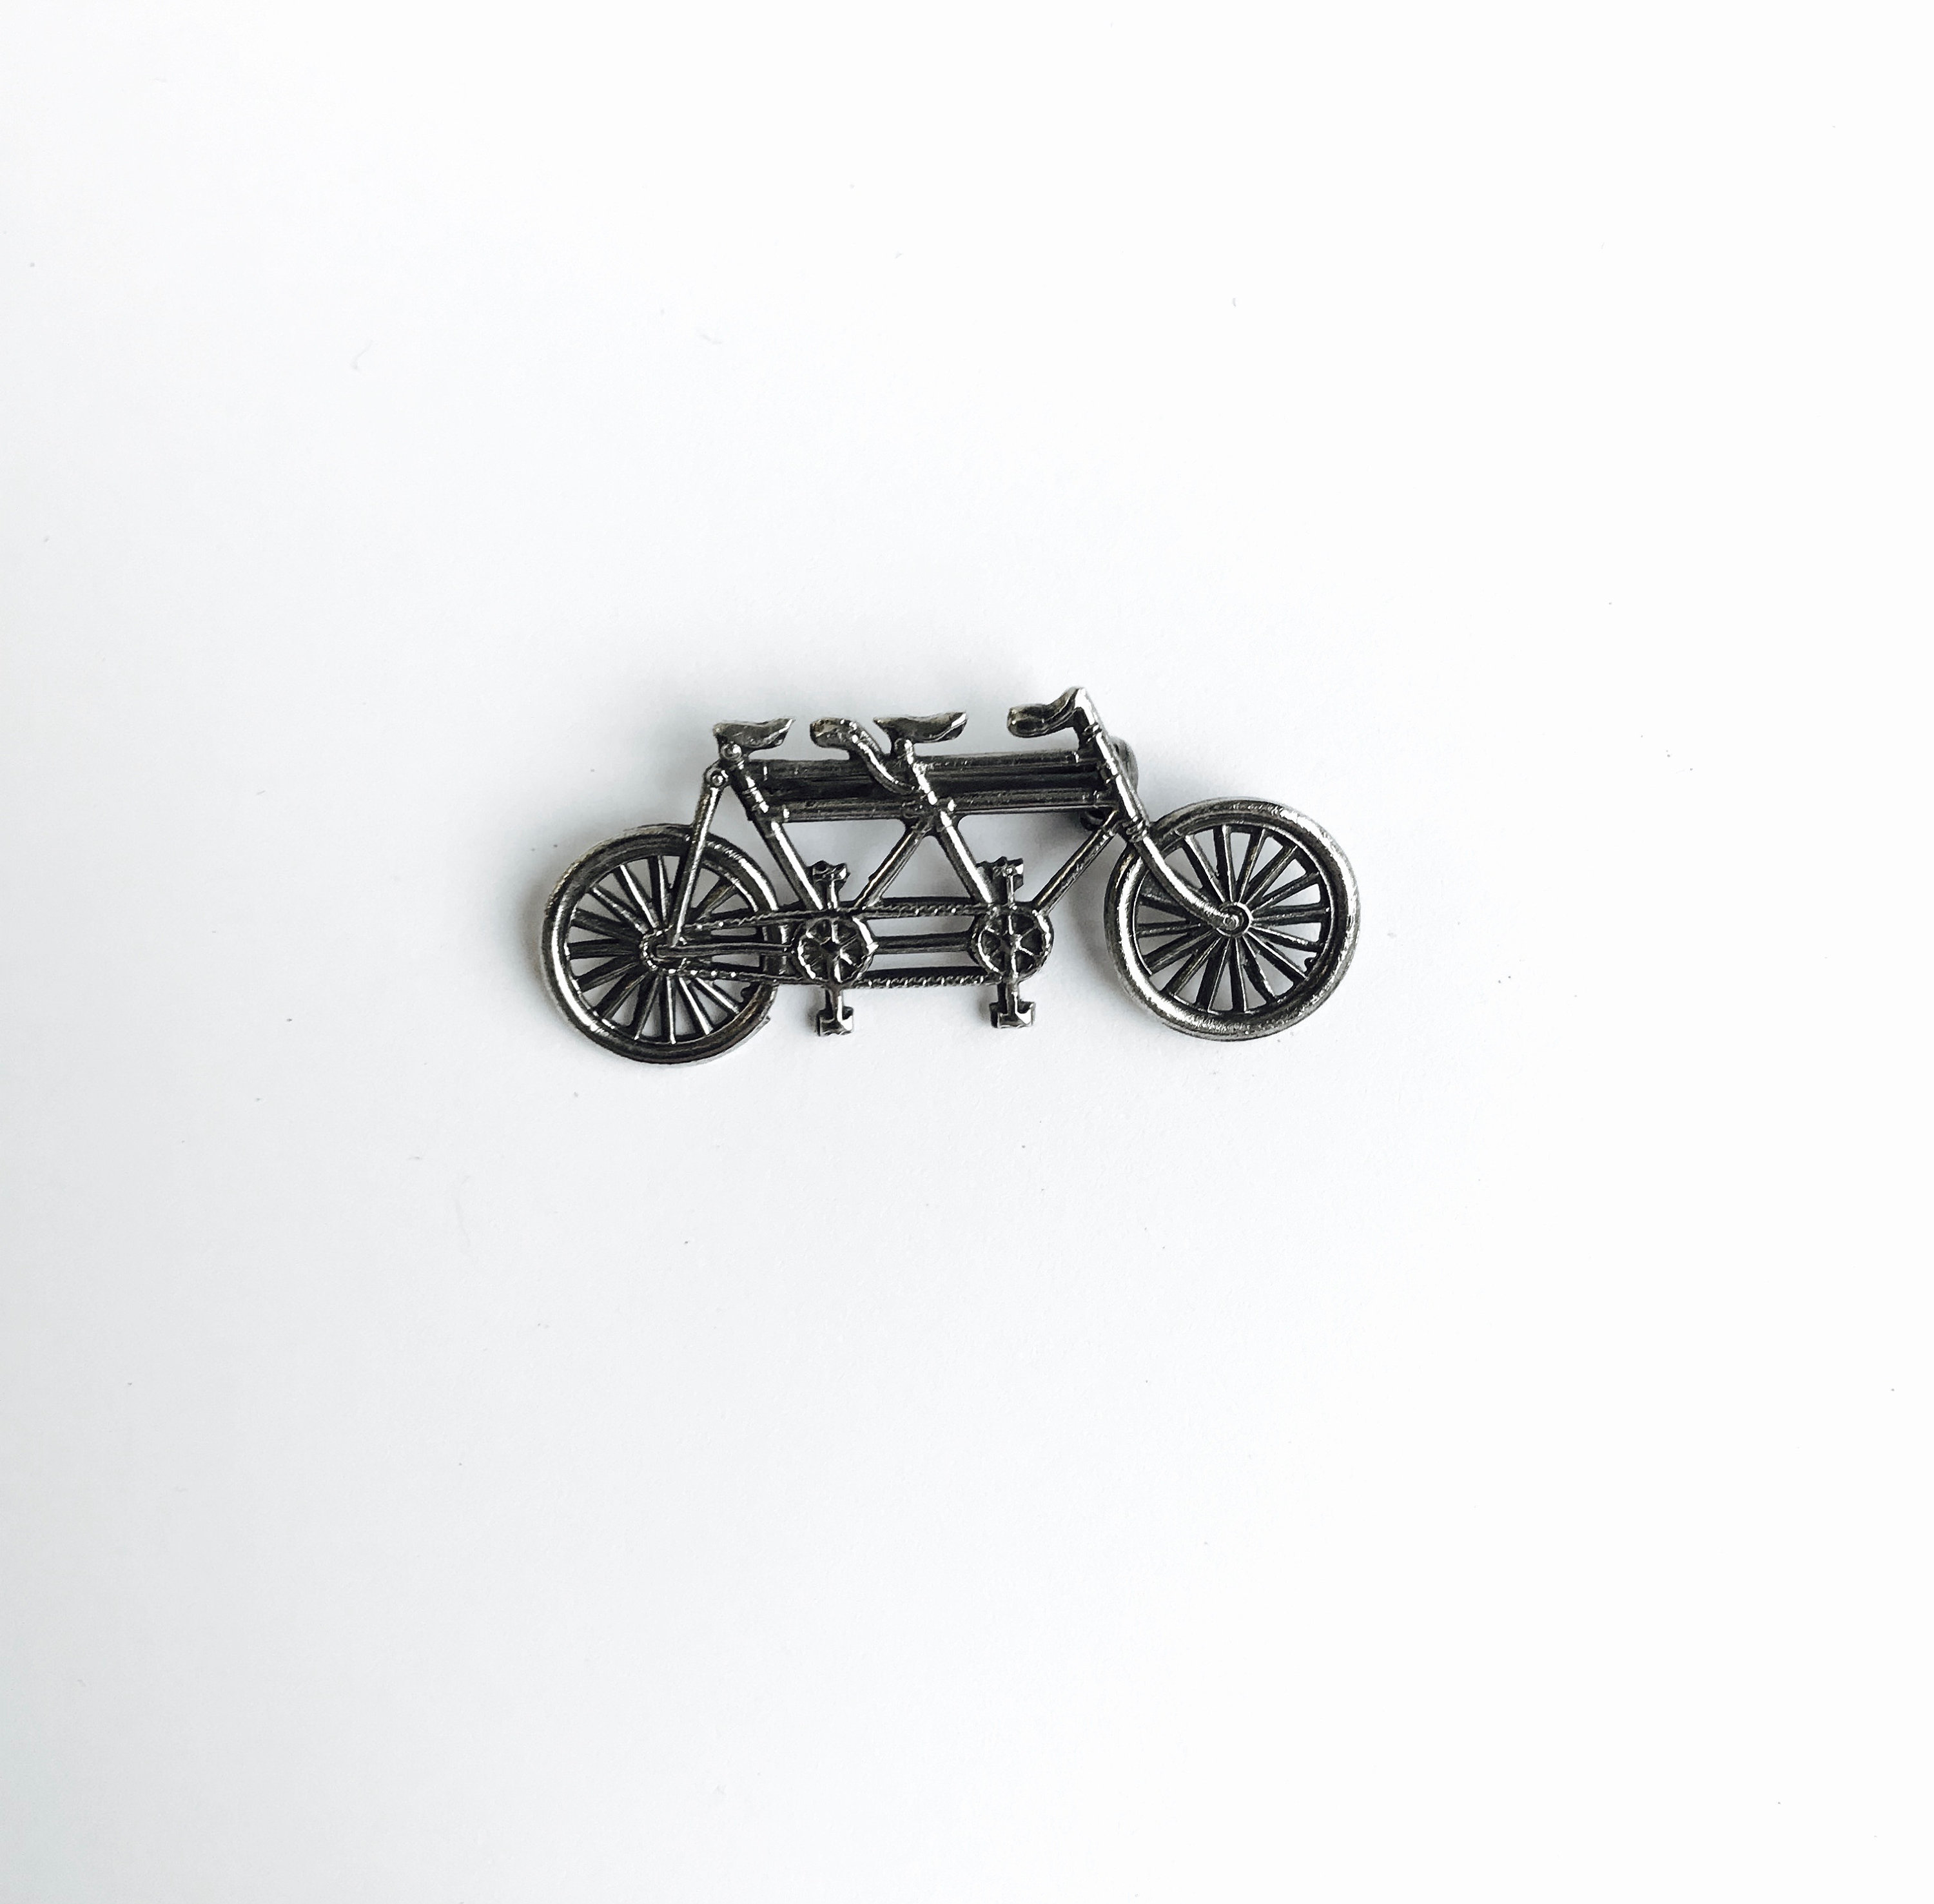 tandem bicycle brooch pin or tie tack antique style bicycle built for 2